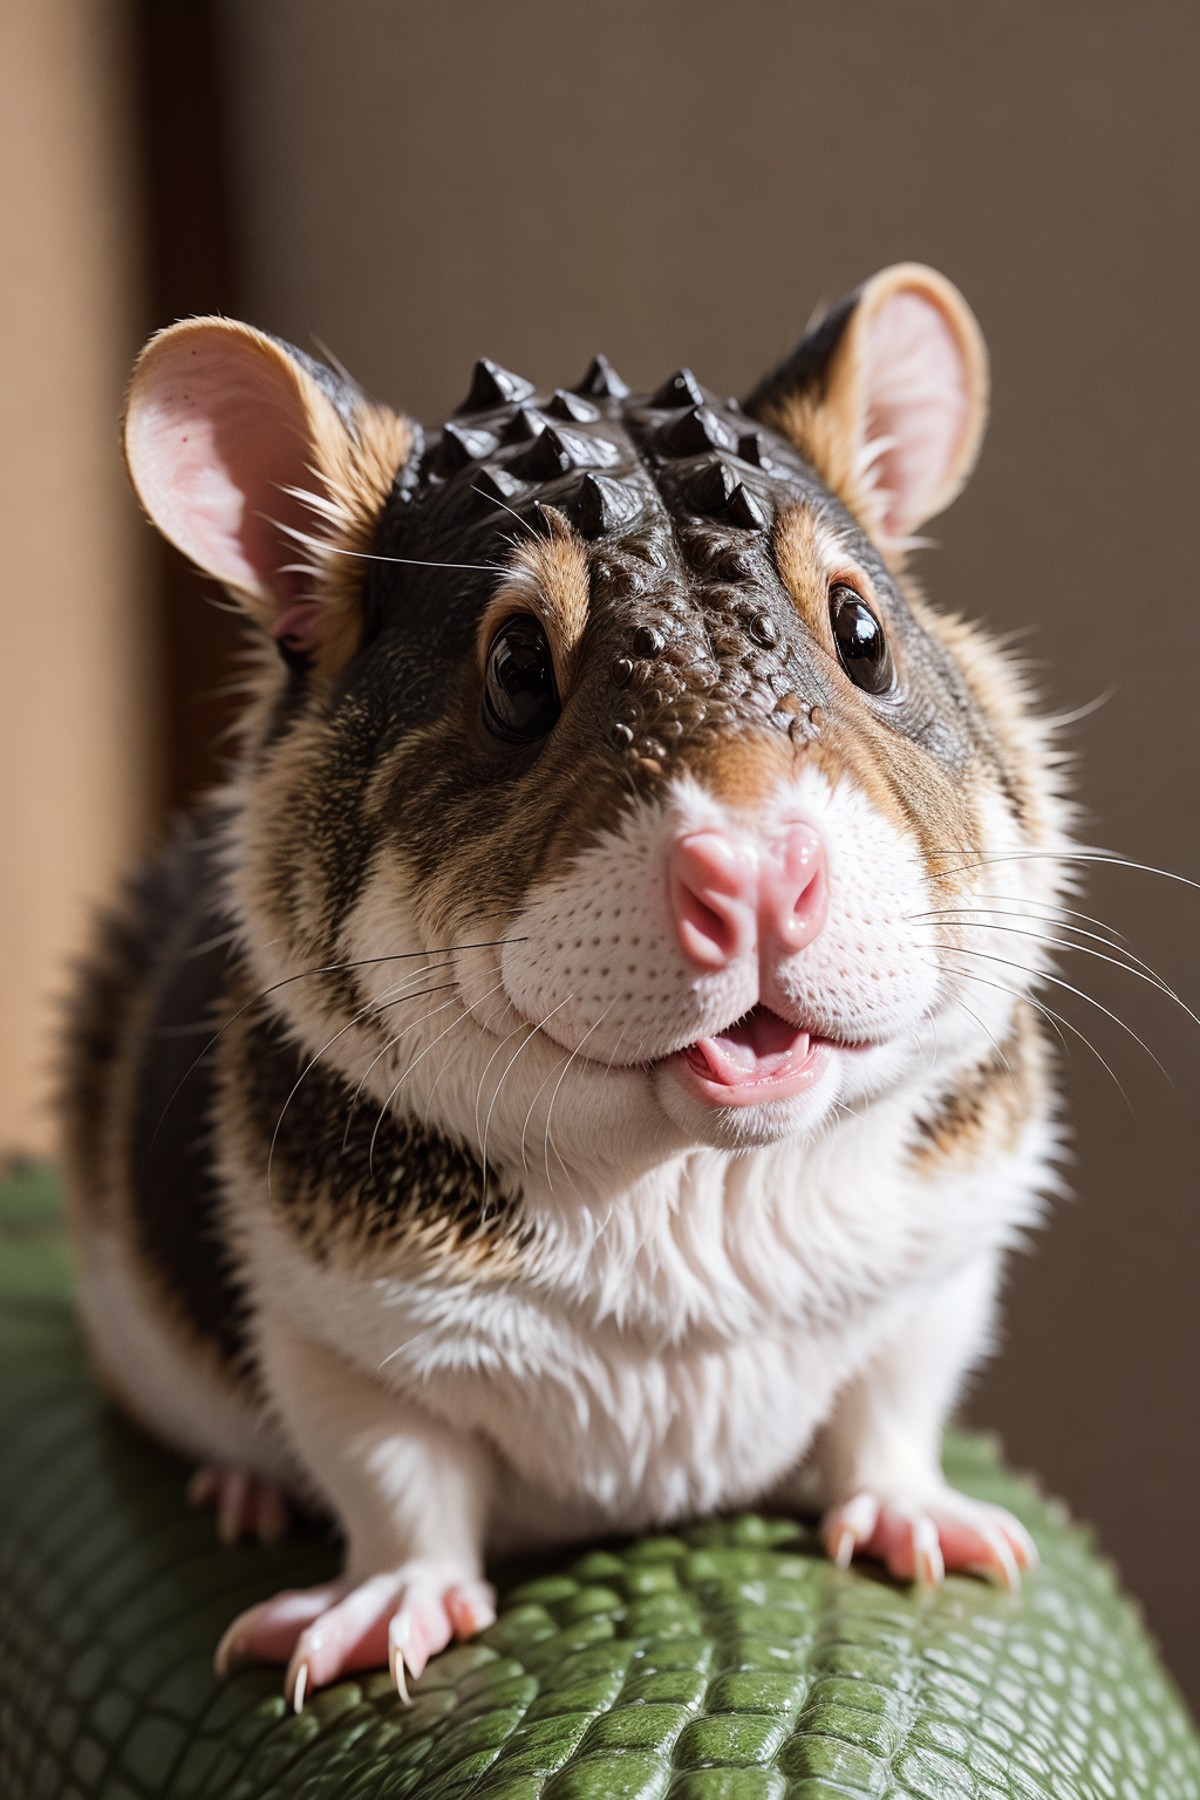 photo of a crocodile hamster hybrid highly detailed realistic, sharp focus